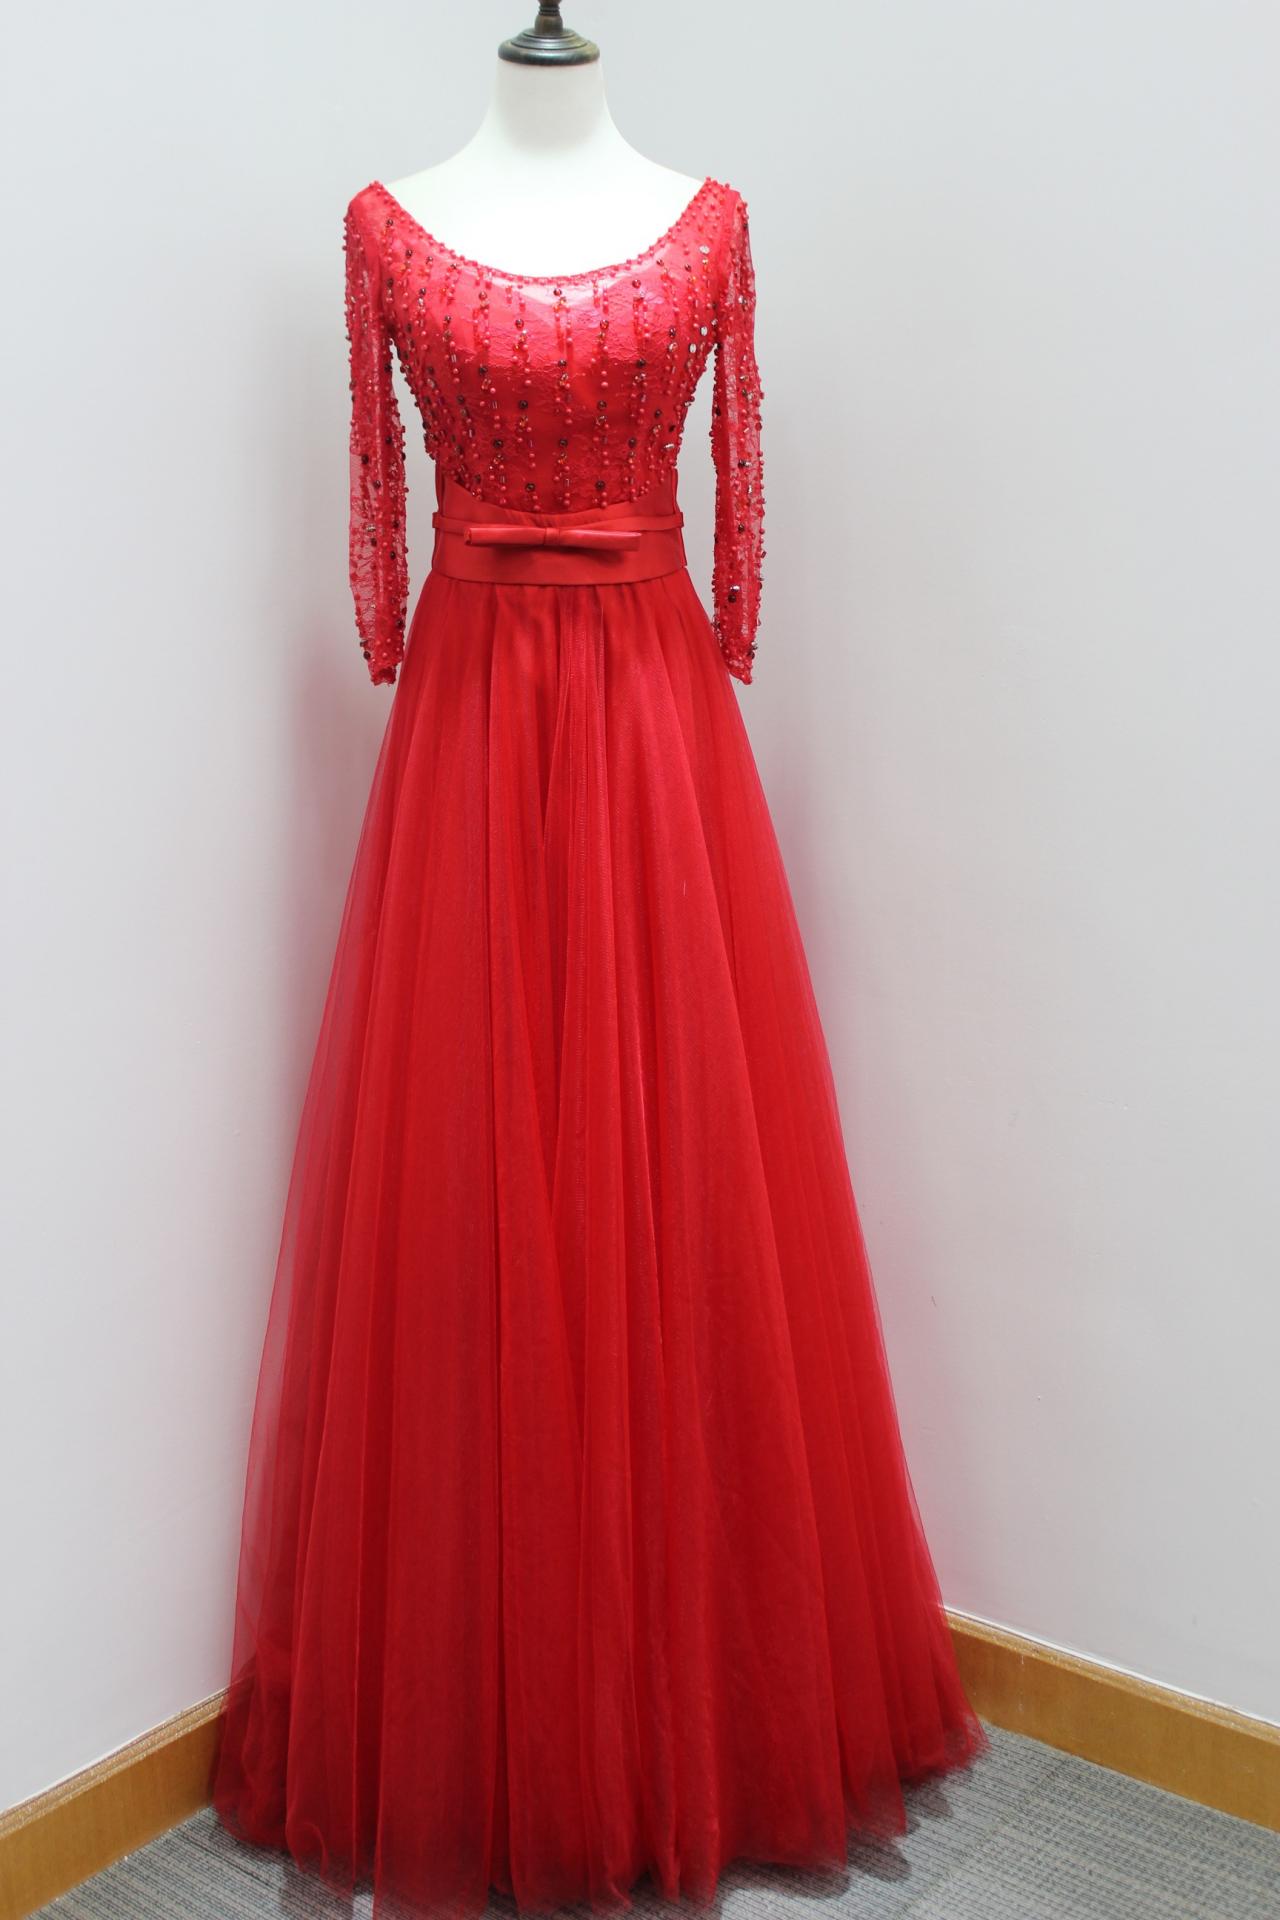 Sexy Red Long Sleeve Evening Dresses With Illusion Neckline Beaded Prom Dress Long Elegant Tulle Formal Gowns